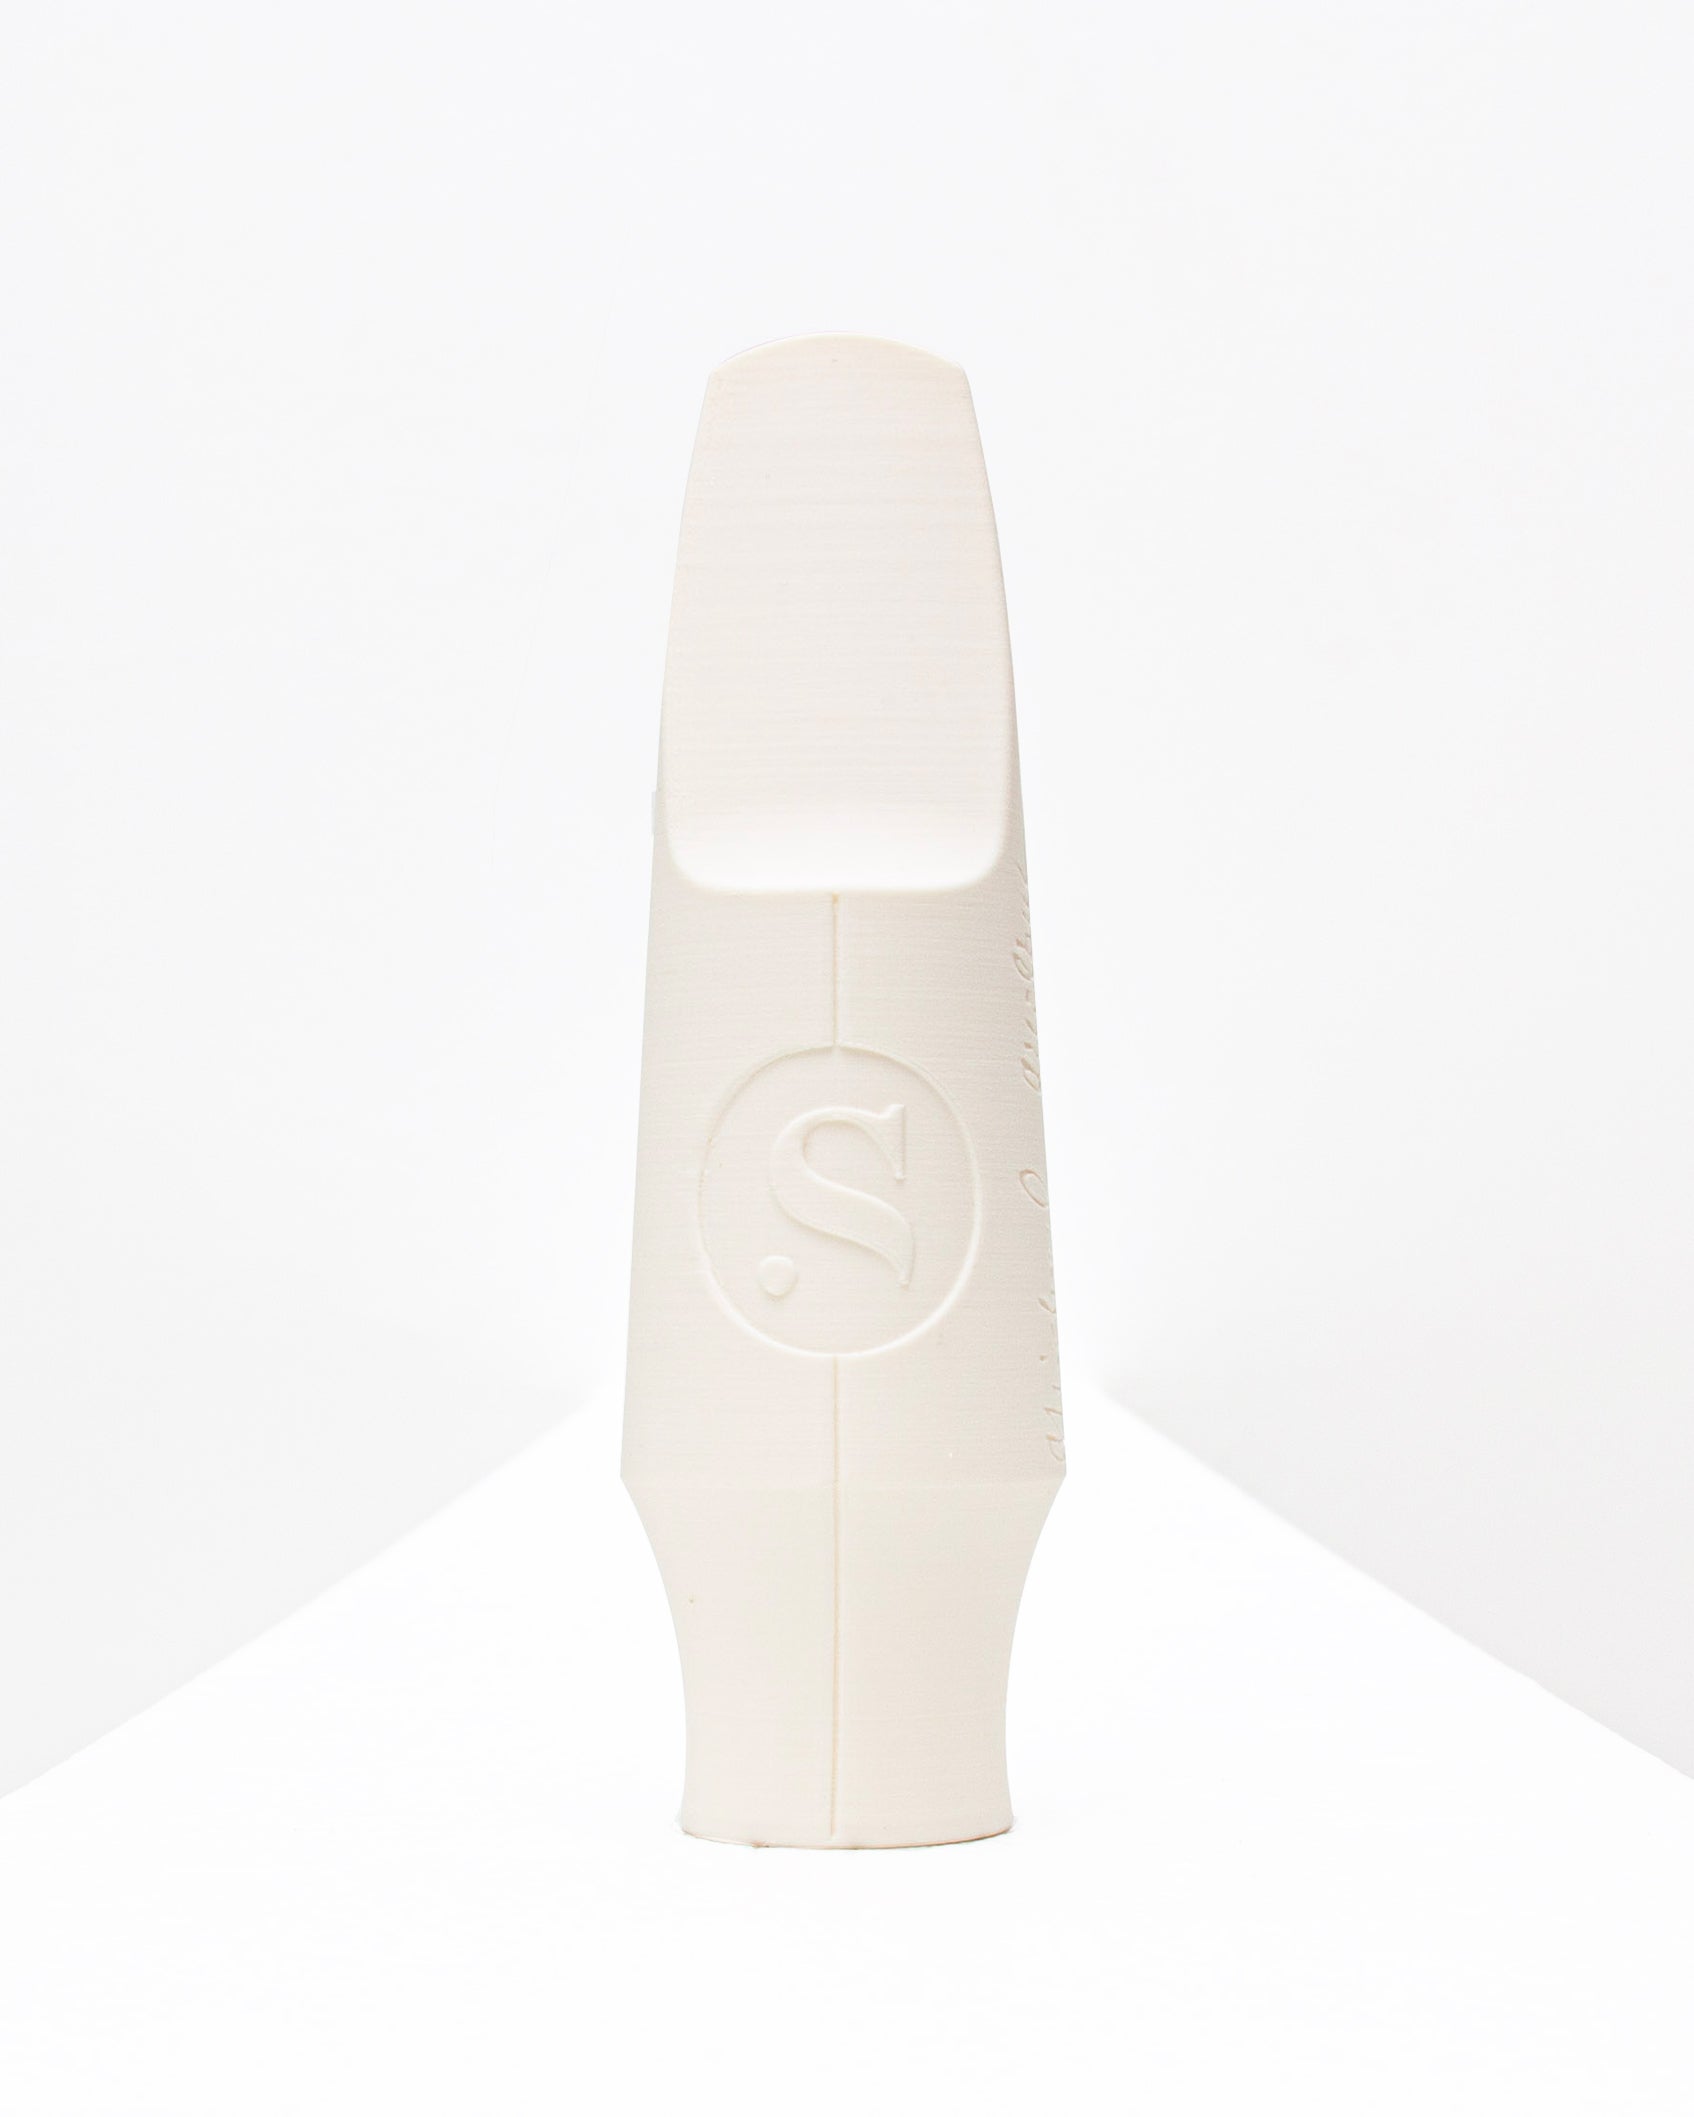 Tenor Signature Saxophone mouthpiece - Dan Forshaw by Syos - 9 / Arctic White